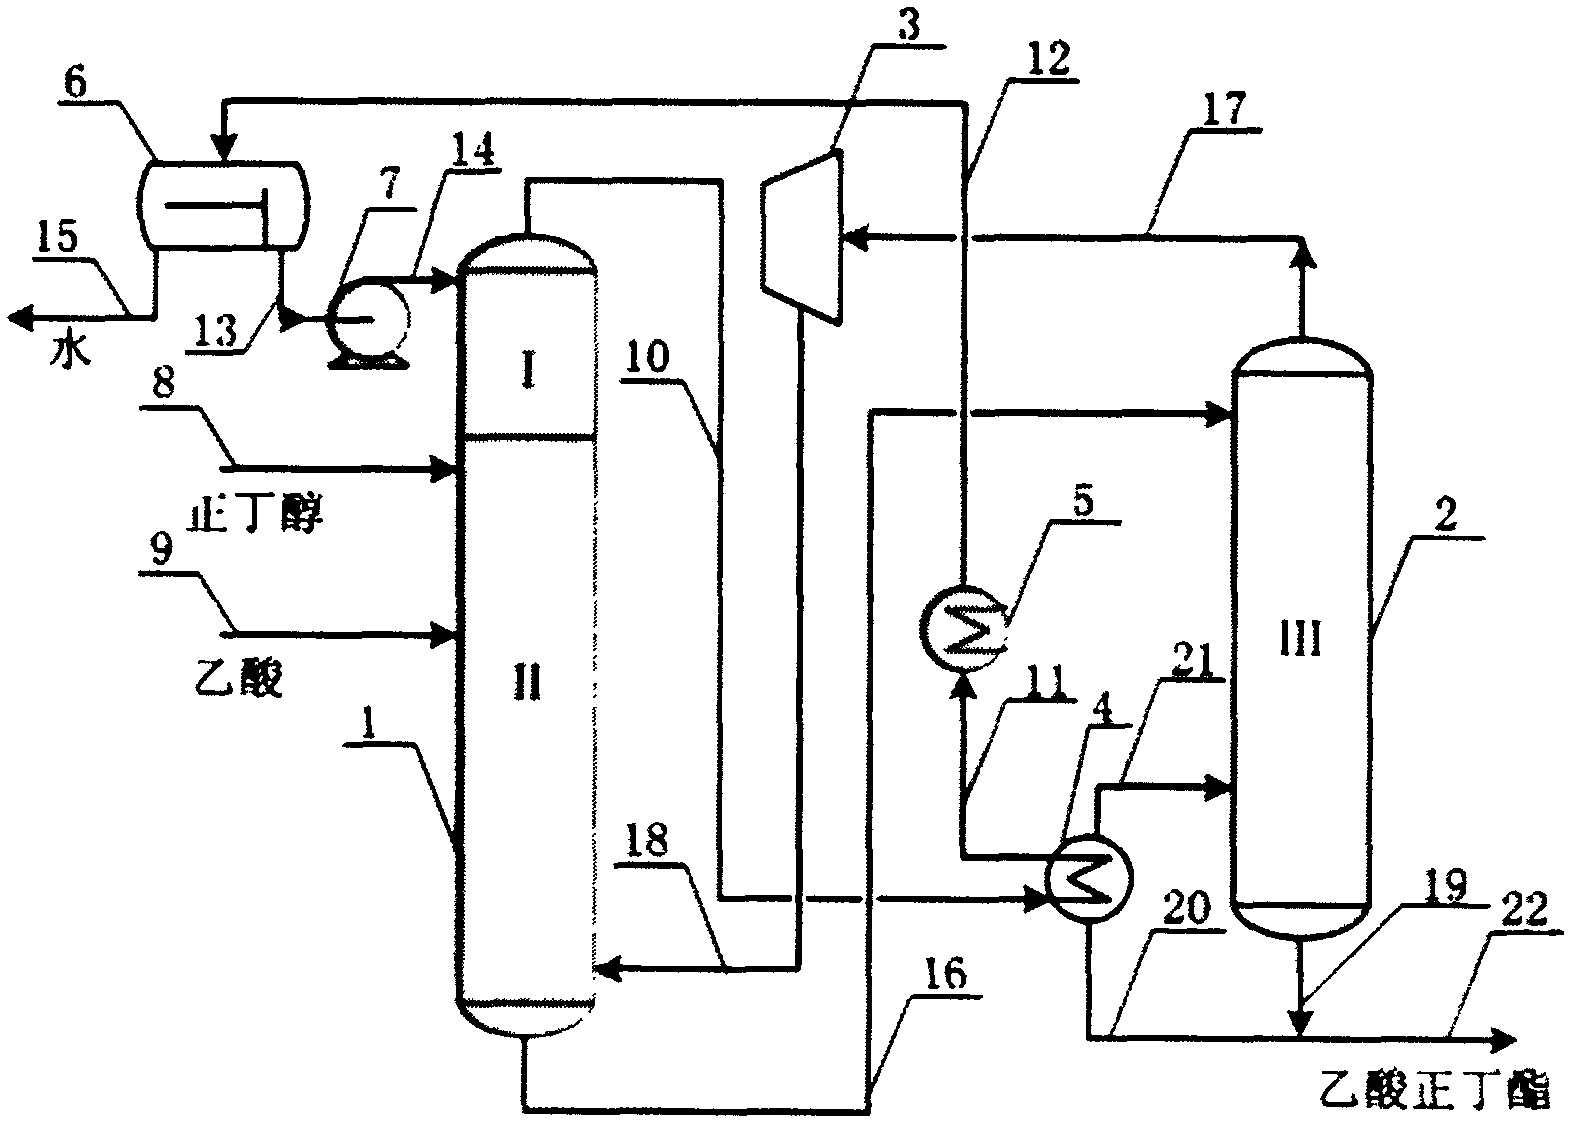 Process for synthesizing n-butyl acetate